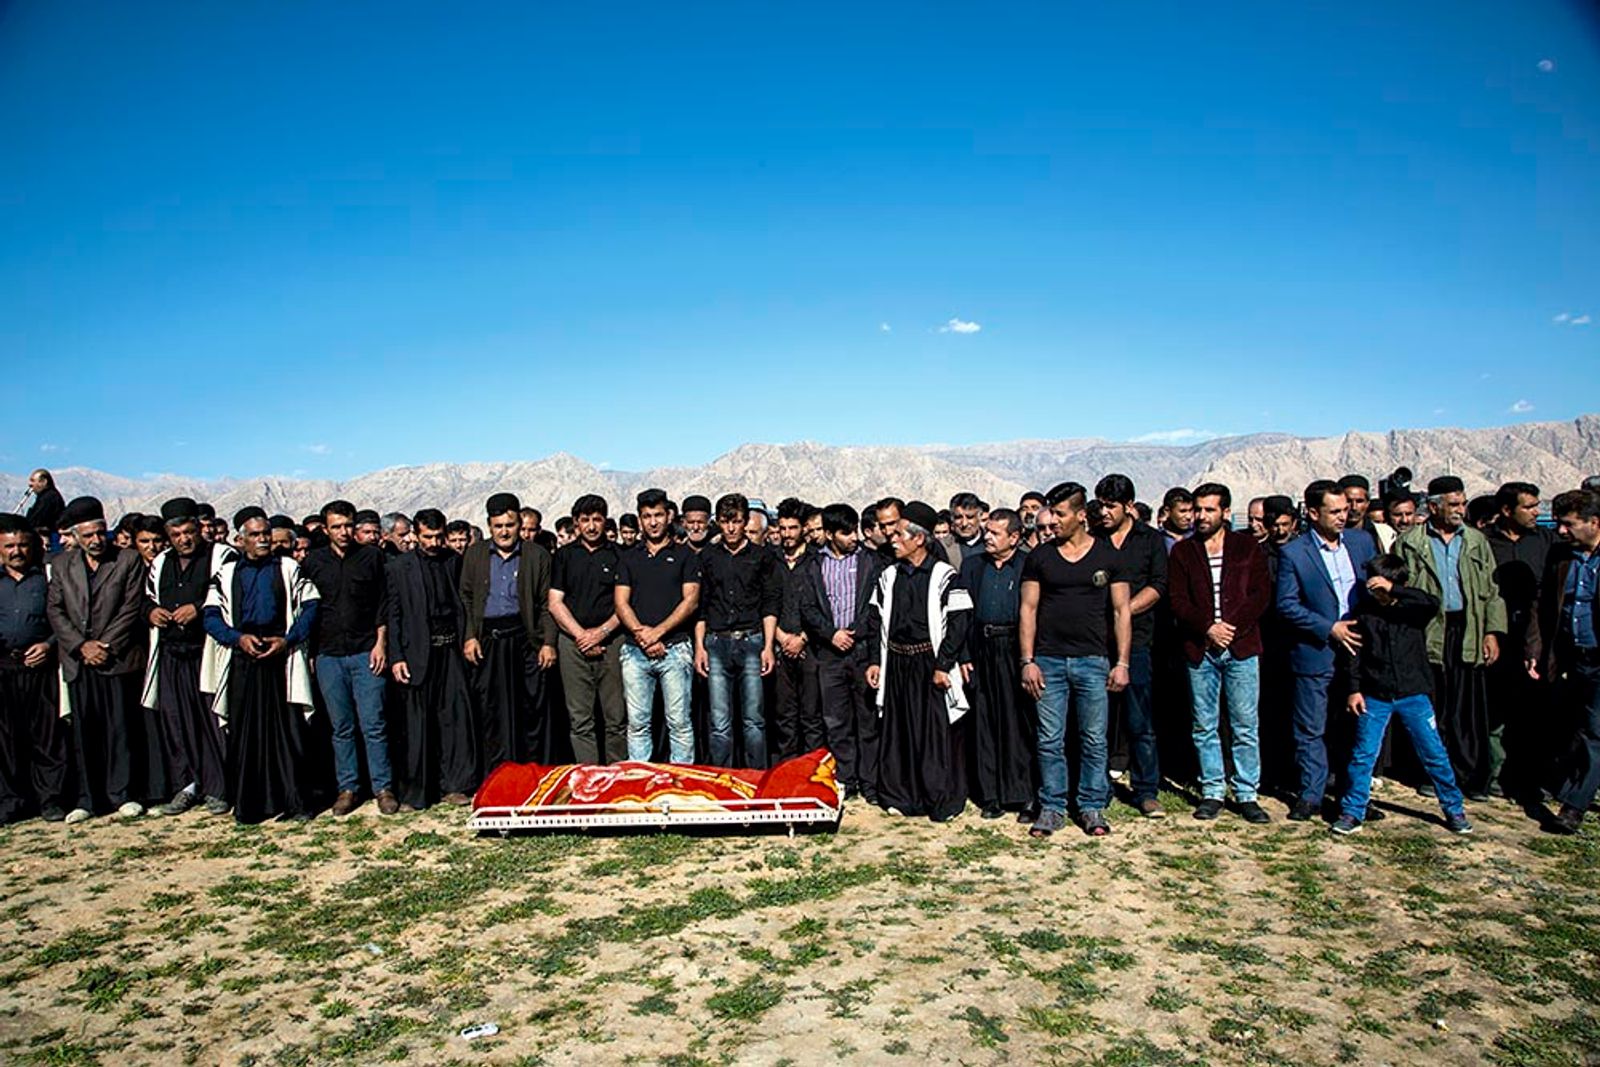 © Catalina Martin-chico - Image from the The Last and The Lost — The Brave Nomads of Iran photography project